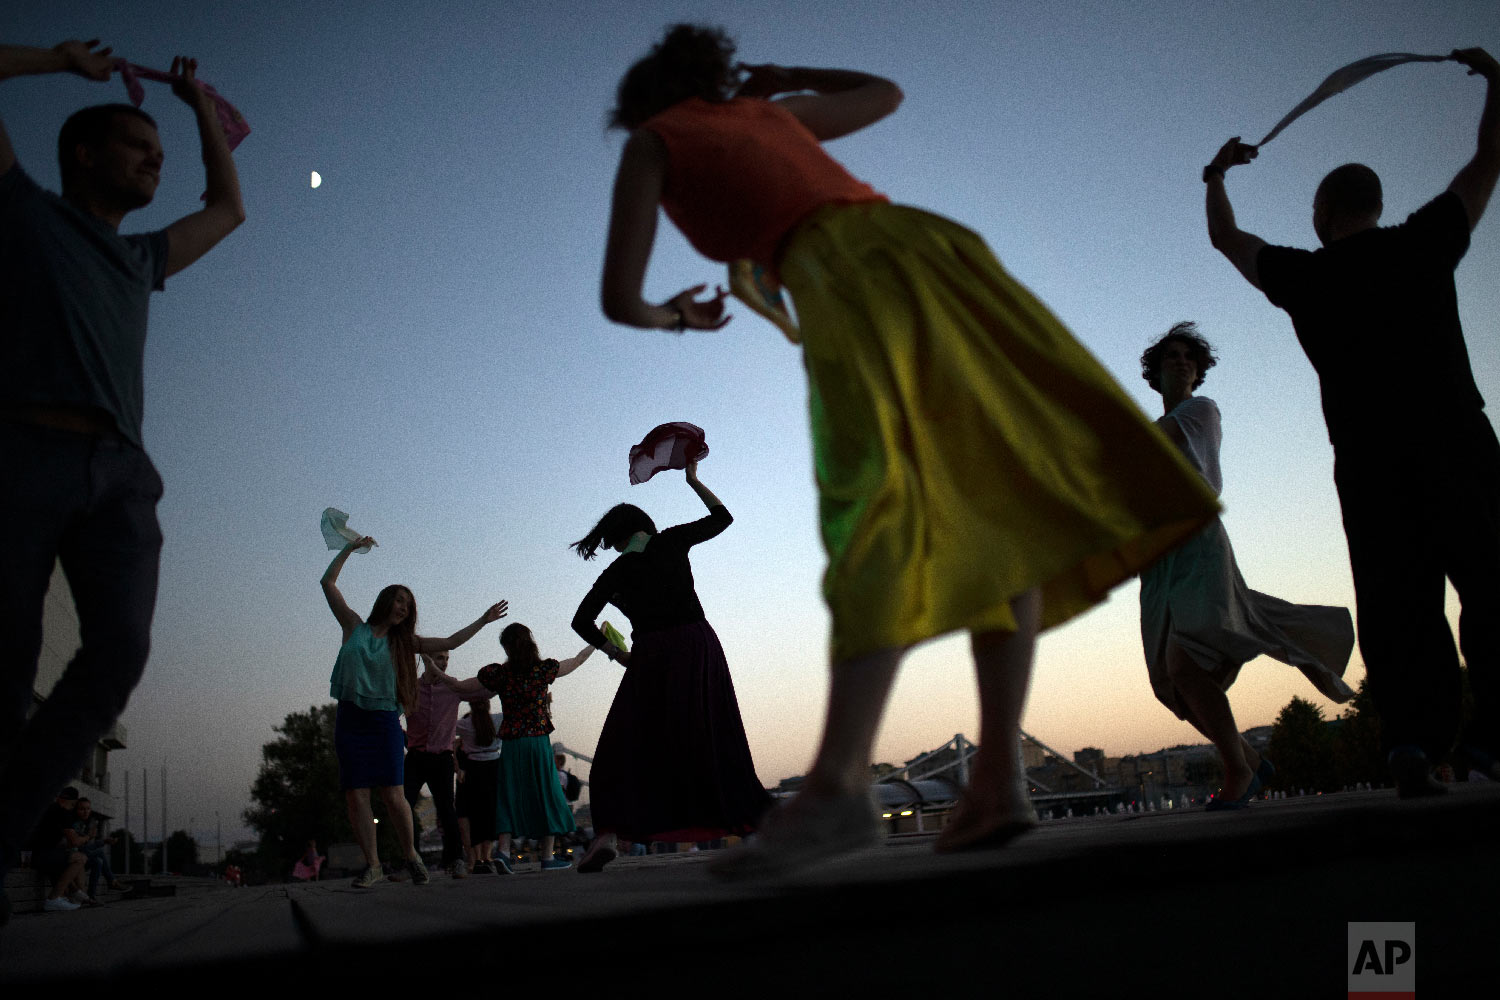  People perform Argentinian dances at the Moskva riverside in Moscow, Russia on June 20, 2018. (AP Photo/Francisco Seco) 